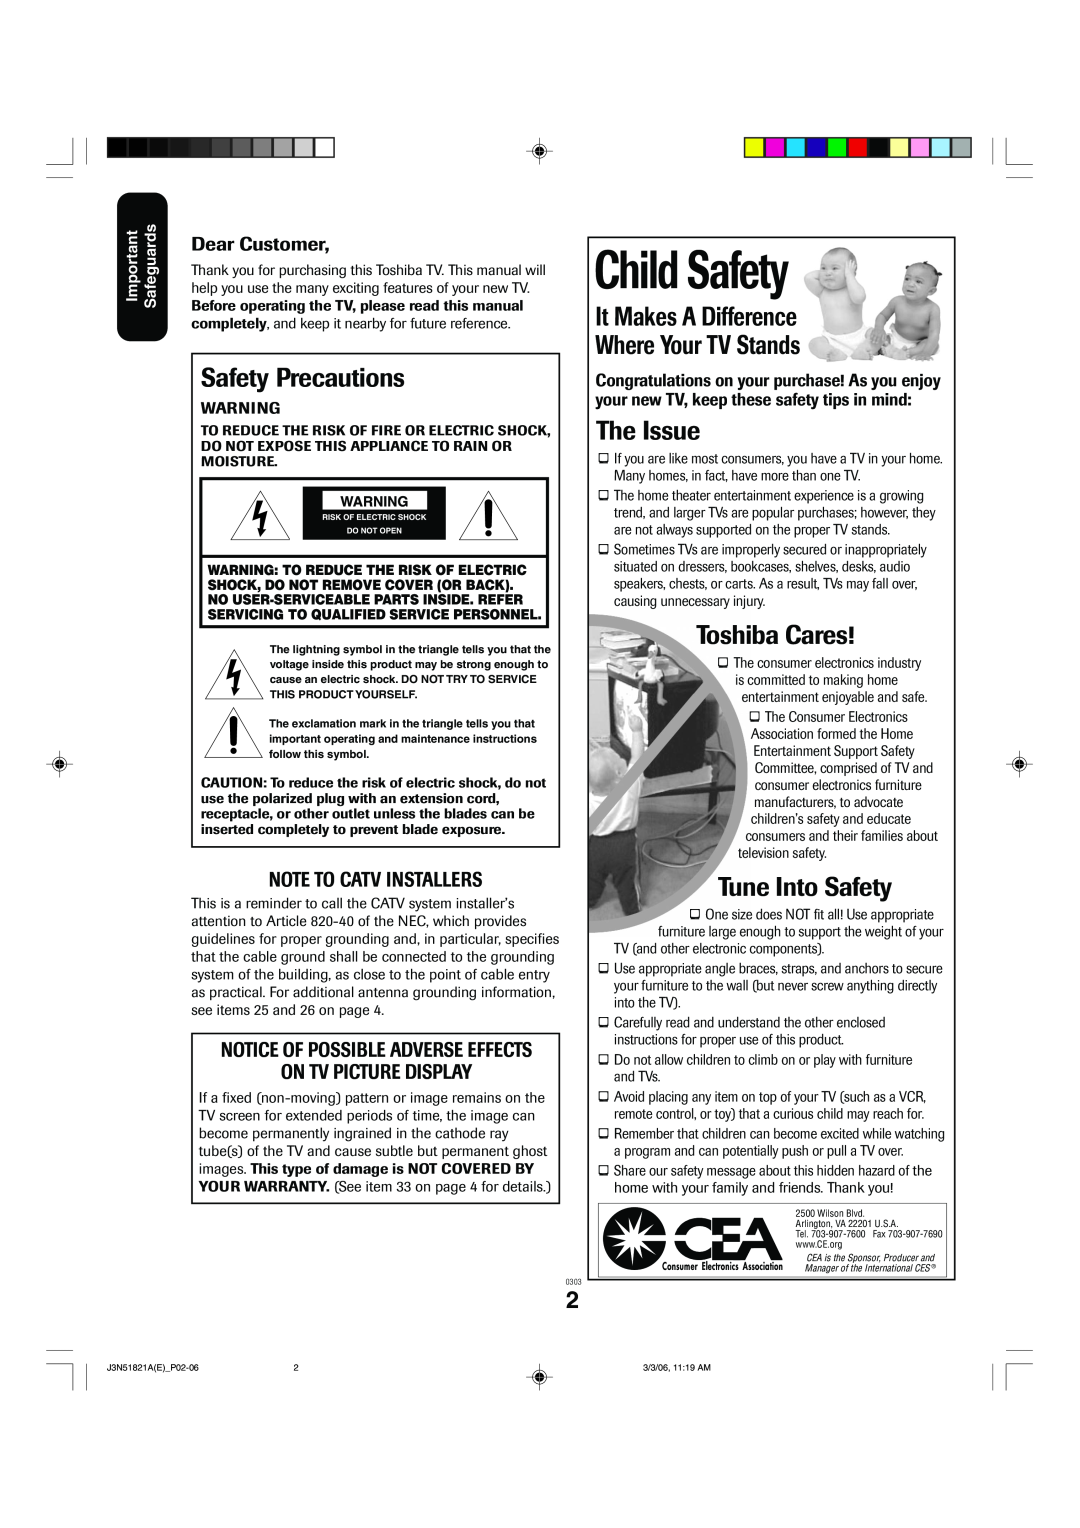 Toshiba 32A36C Child Safety, Safety Precautions, It Makes A Difference Where Your TV Stands, The Issue, Toshiba Cares 